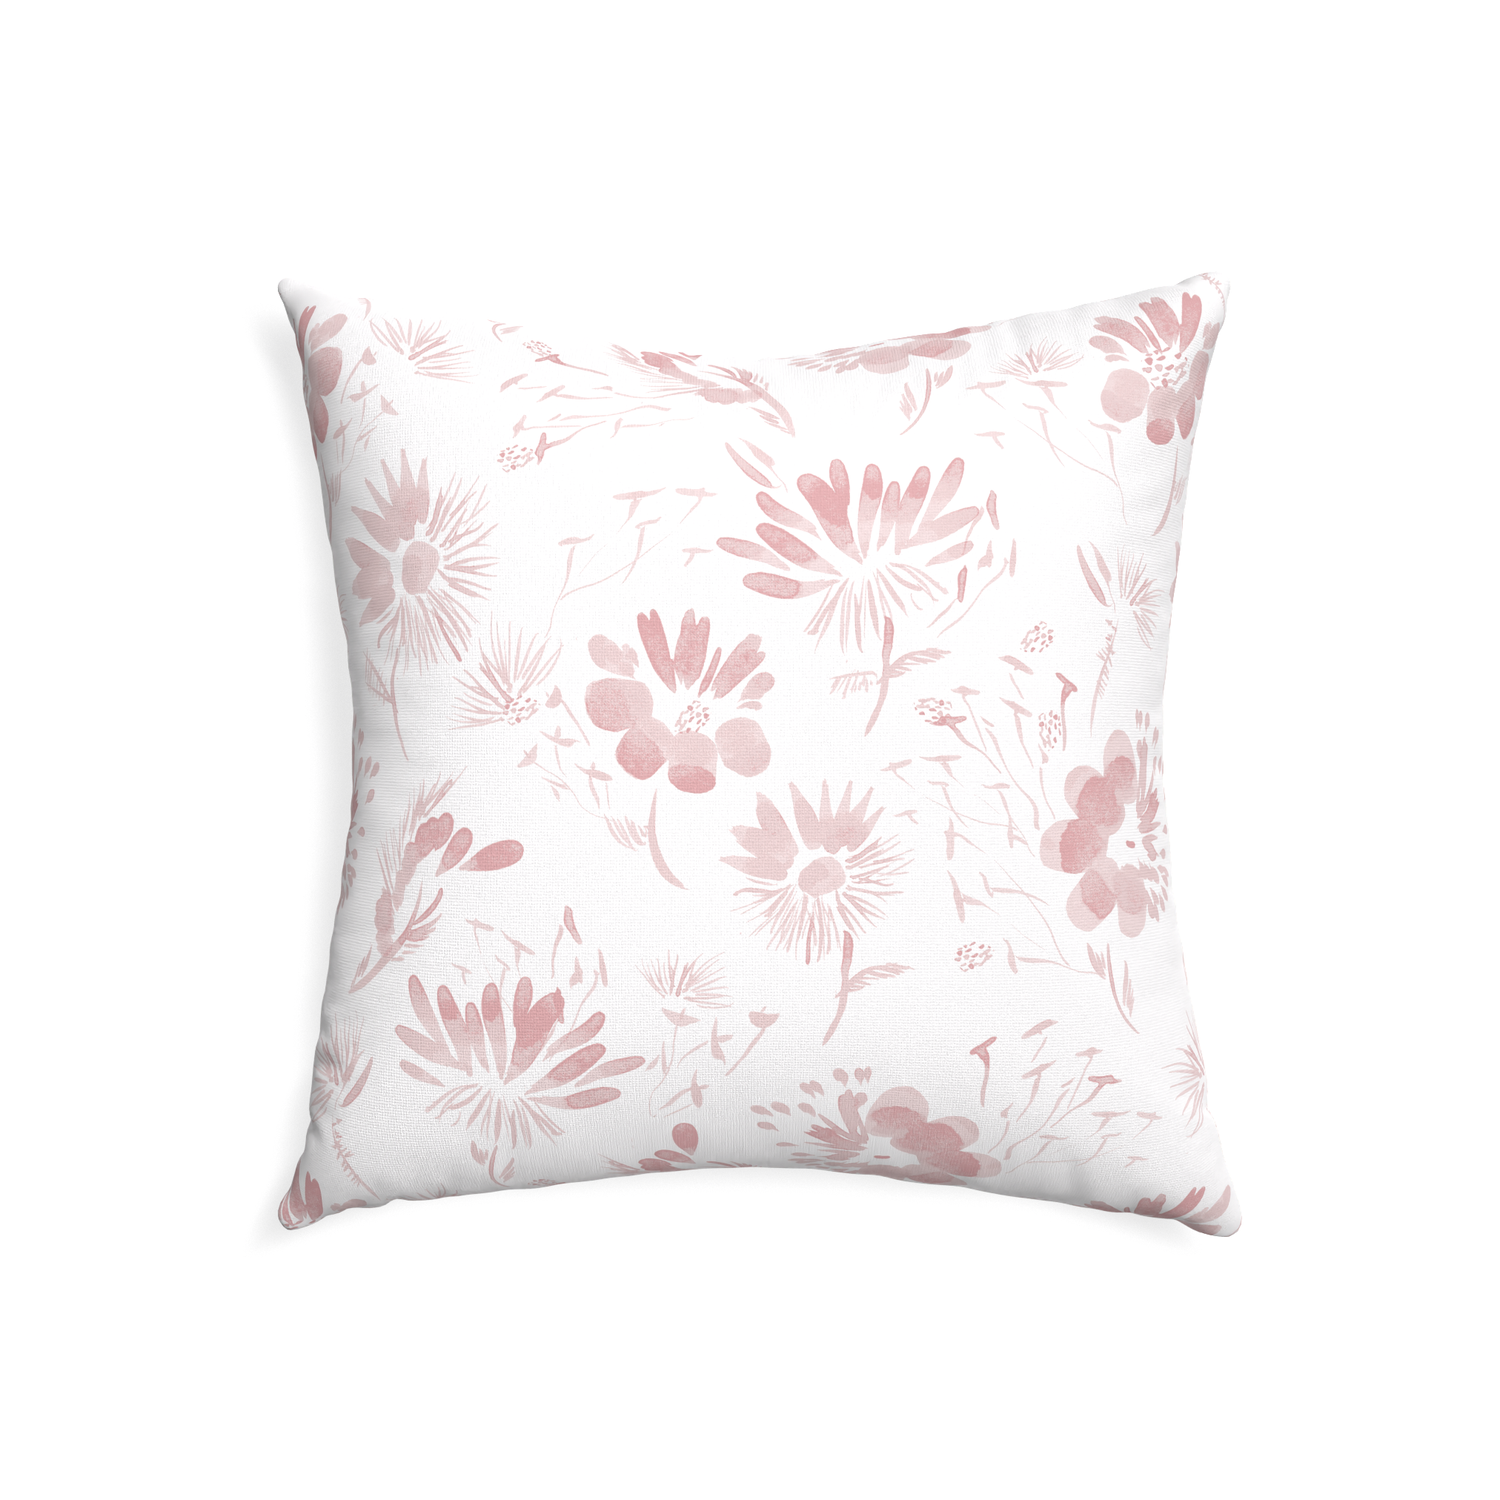 22-square blake custom pink floralpillow with none on white background